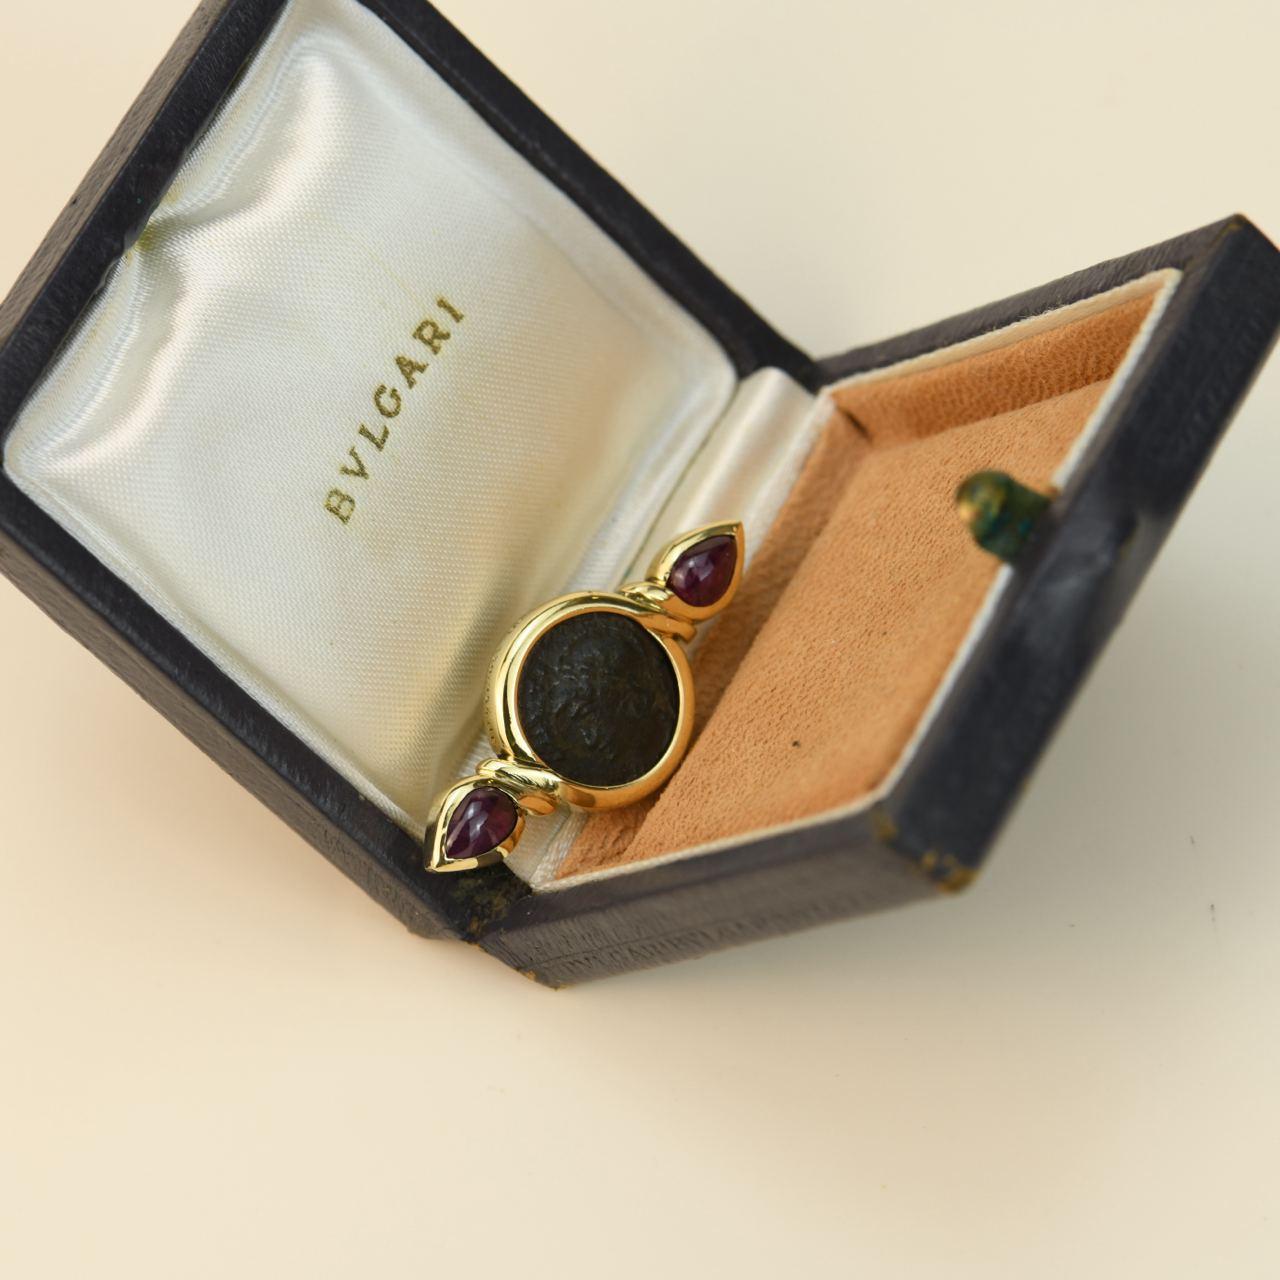 SKU	CT-2402
Comes With	Box Only
Date	approx 1990
Model	Bvlgari Monete
Metal	18k Yellow Gold
Stones	Ruby
Weight	approx 7.6 g
Length	approx 3.5 cm
Condition	Excellent
Other Info	Coin diameter : approx 14mm
___________________________________
If you